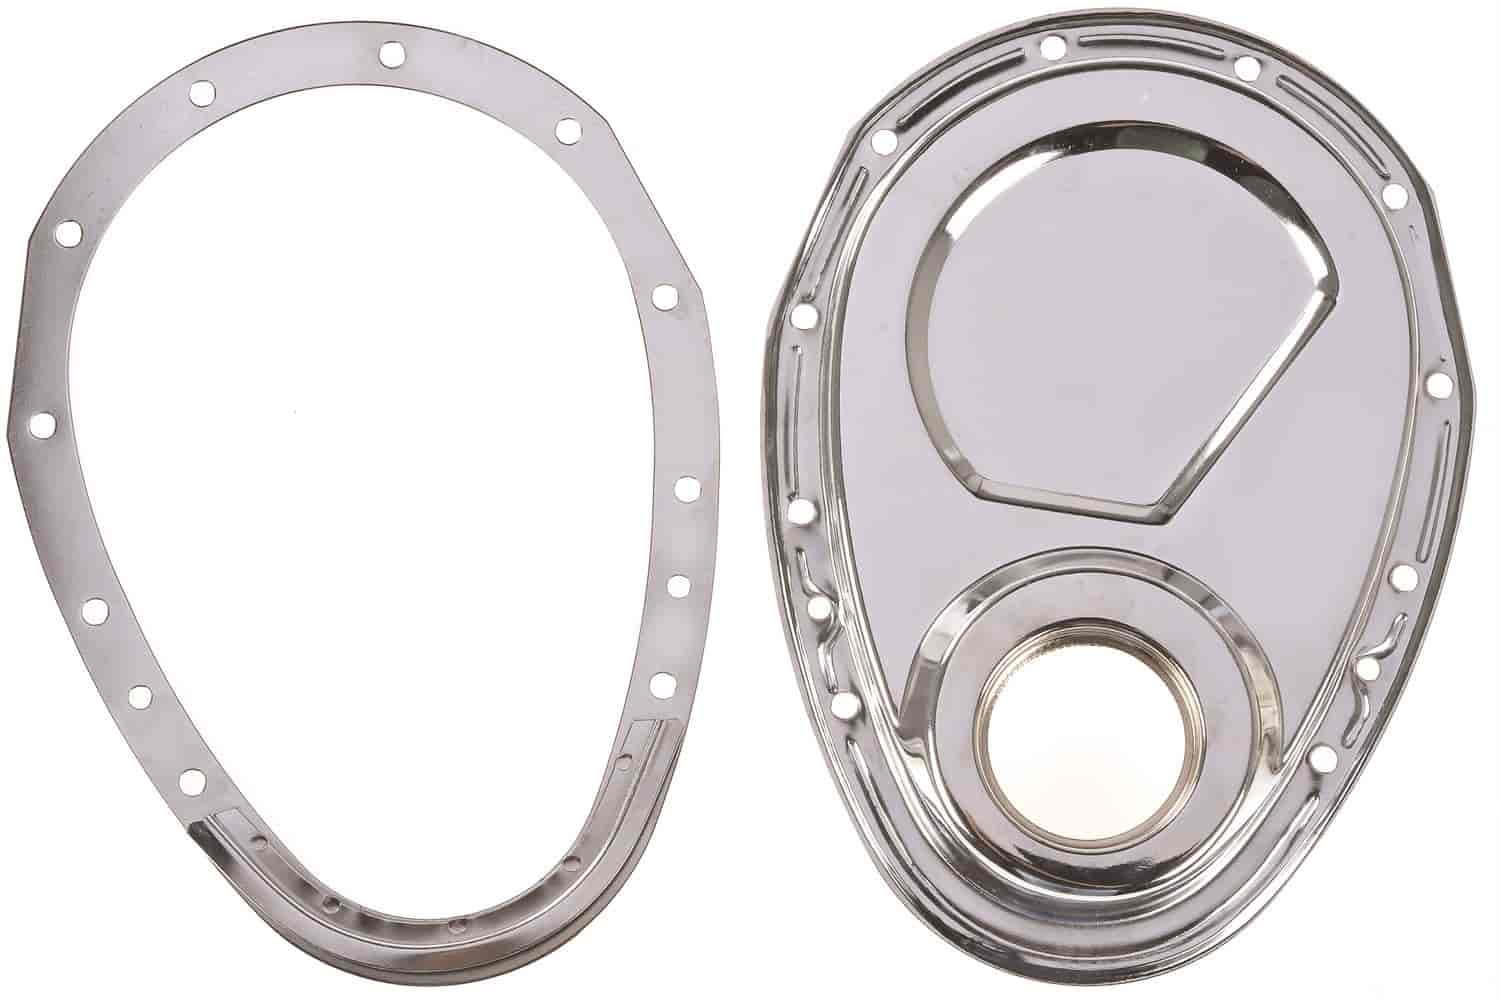 Timing Cover Kit for 1955-1986 Small Block Chevy